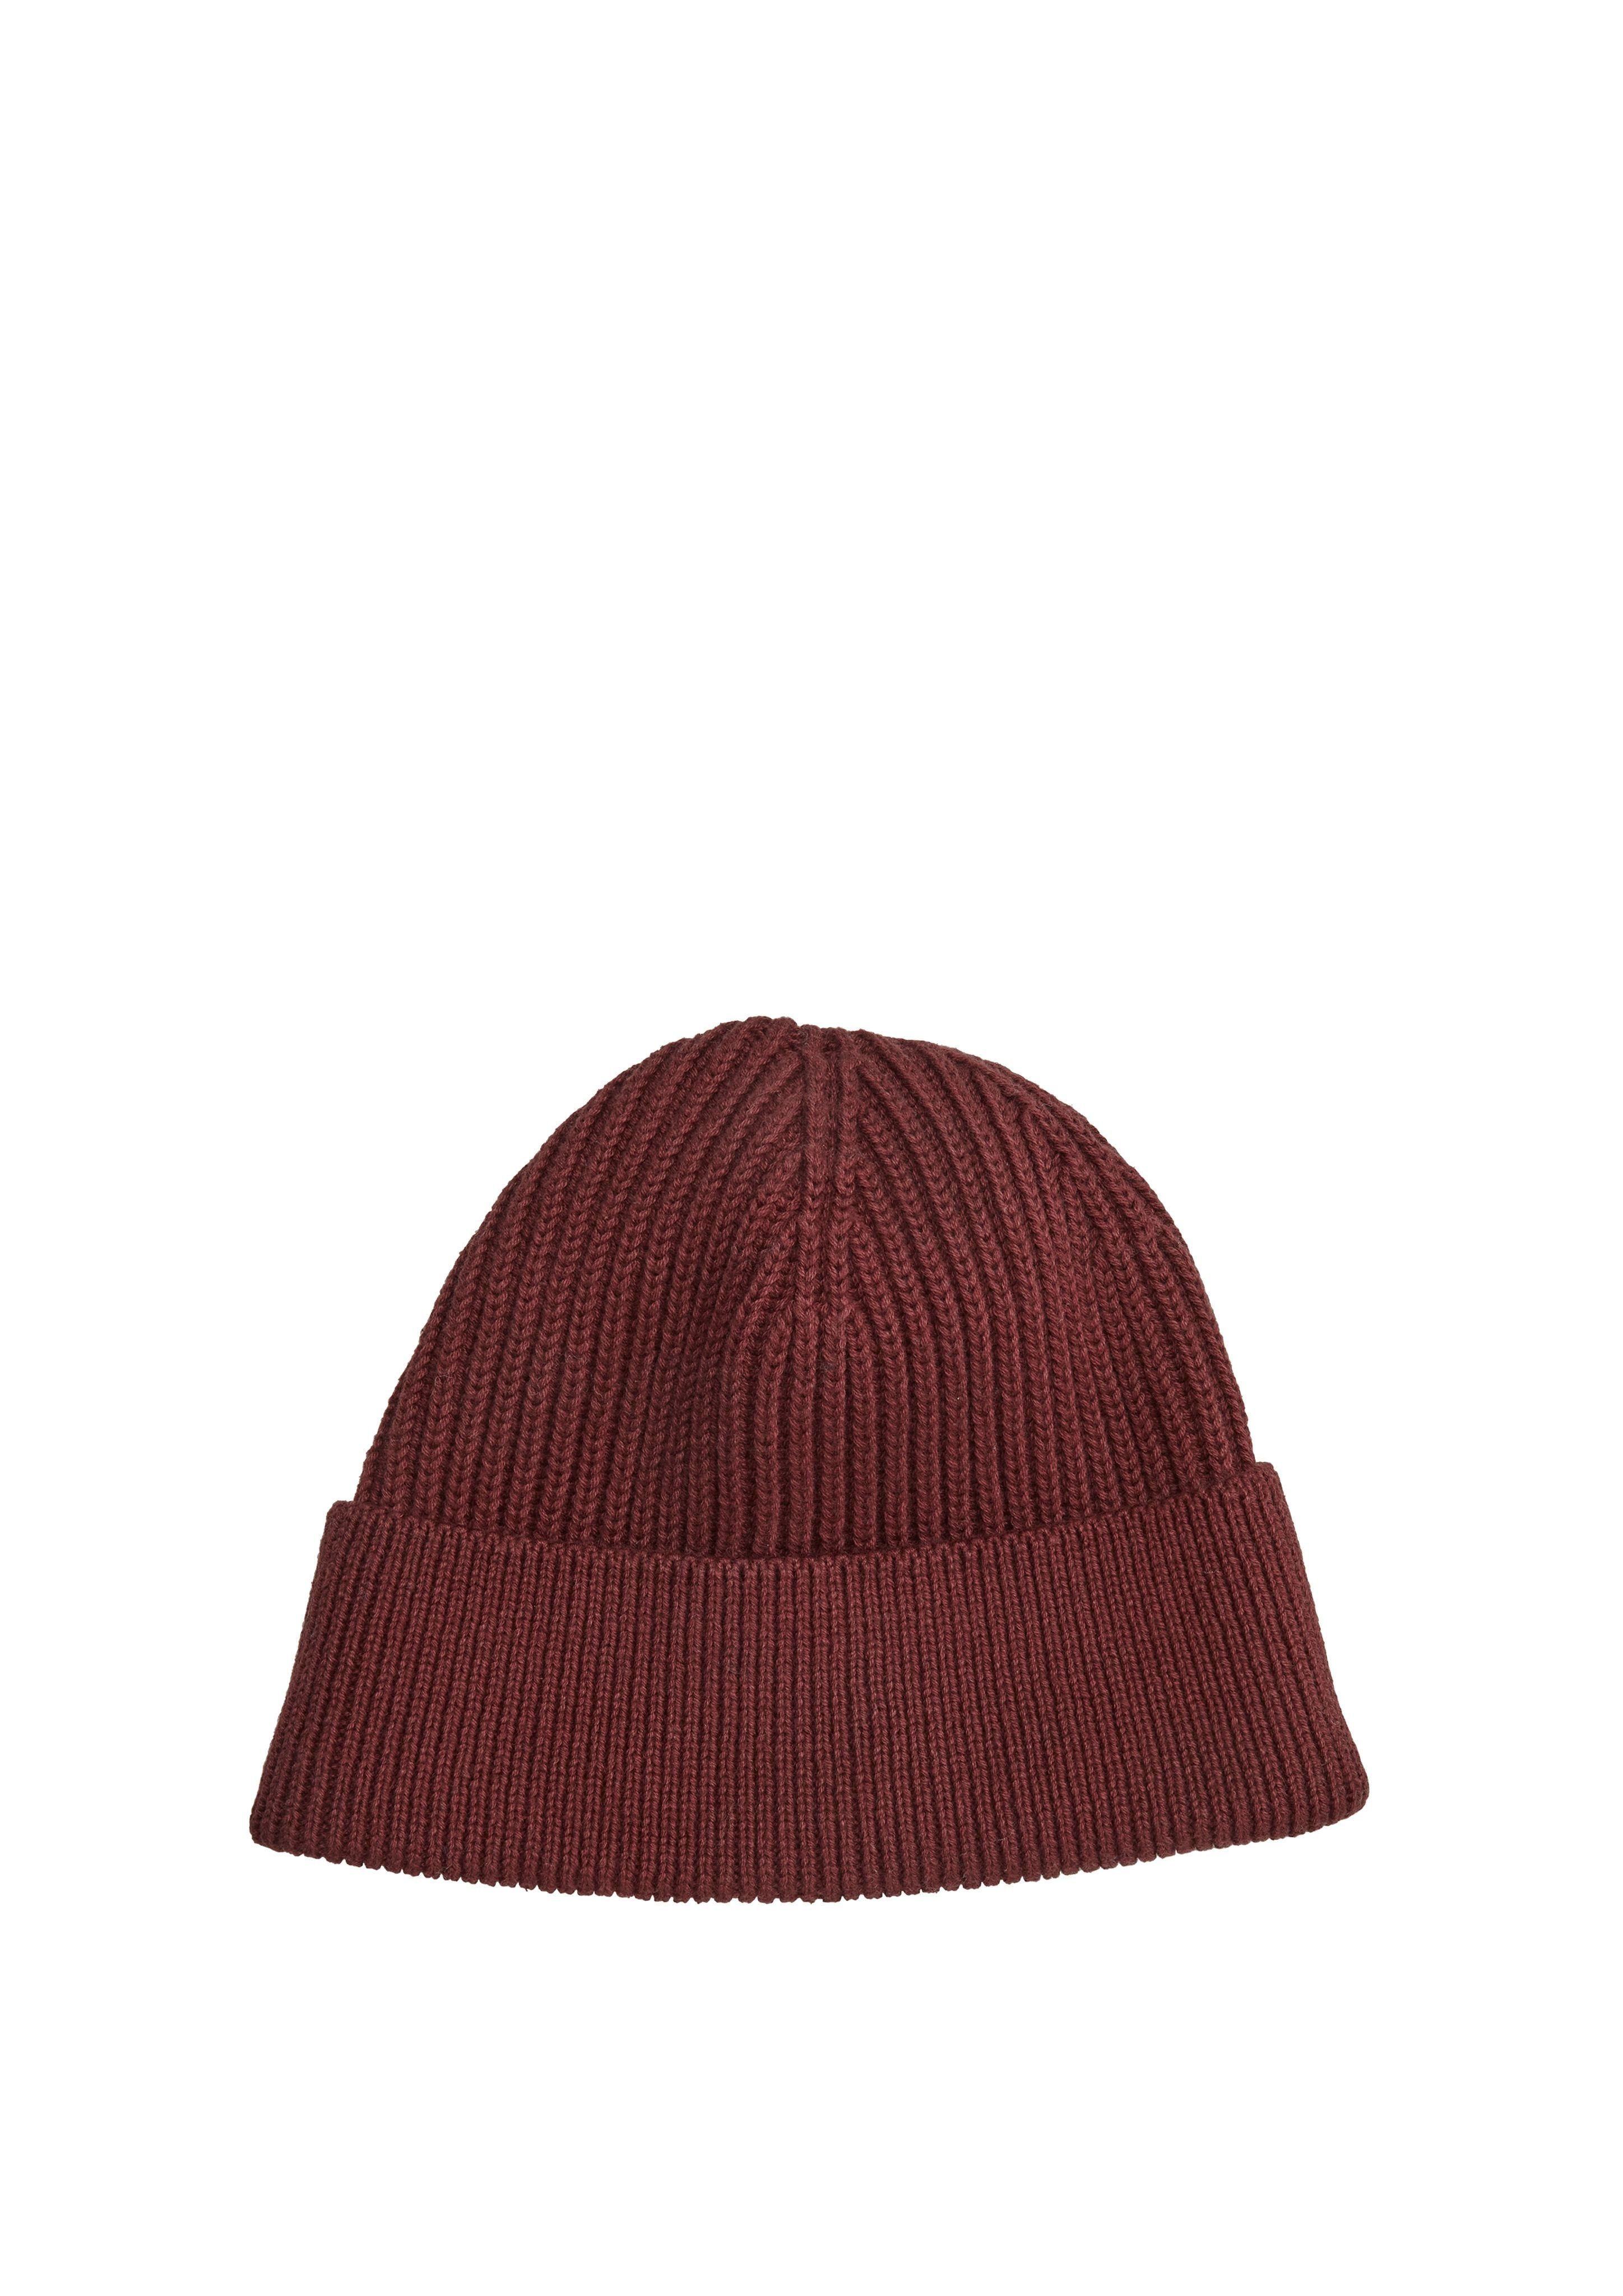 s.Oliver Beanie rot - pink | Beanies